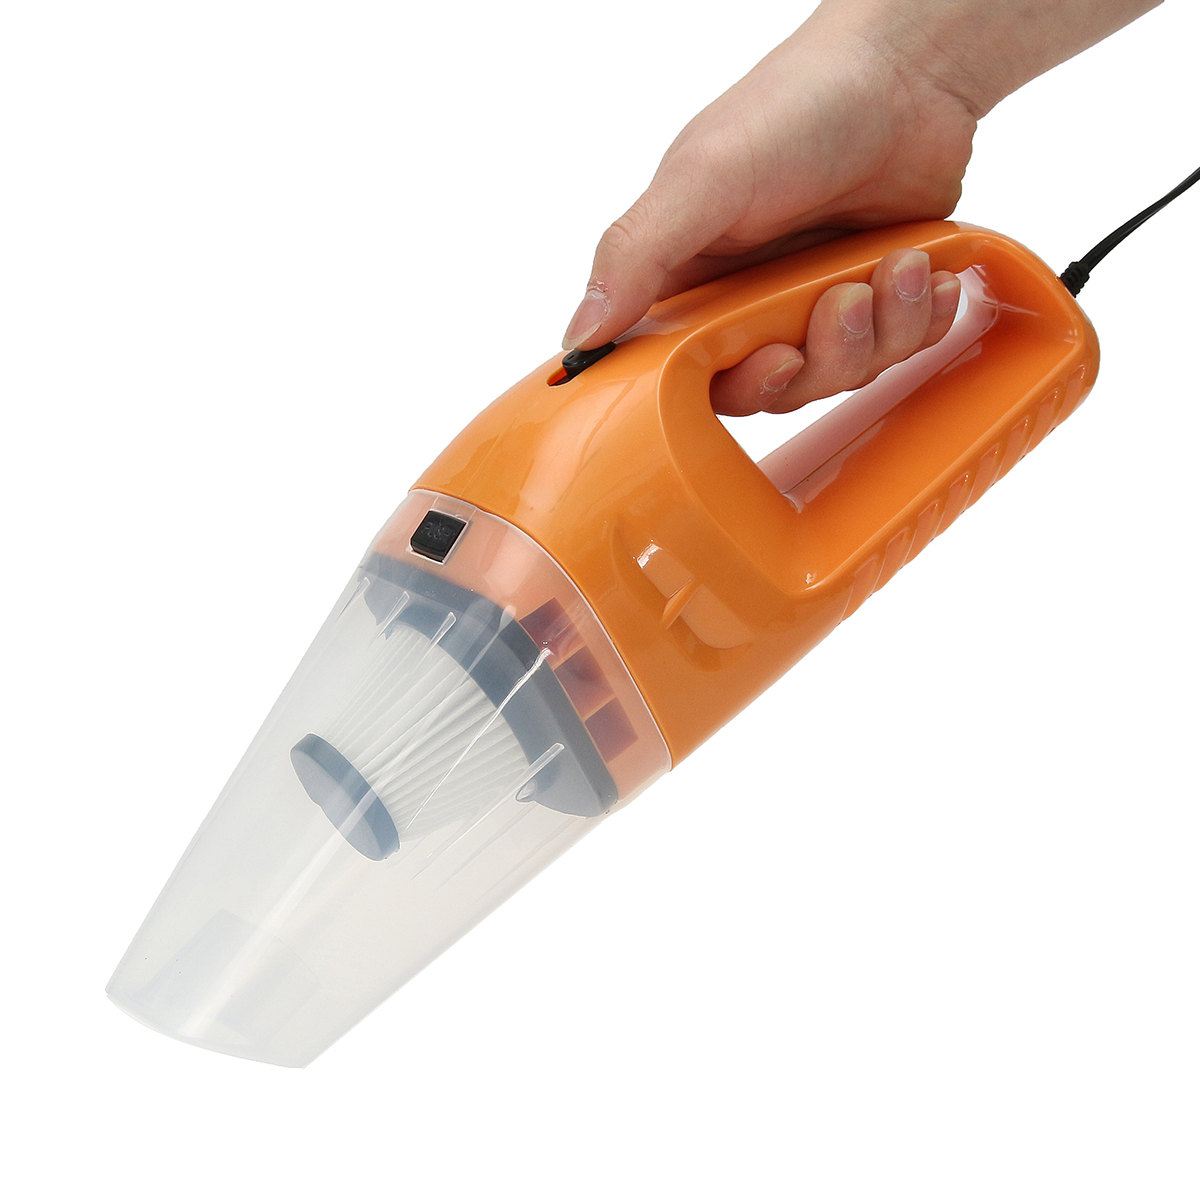 

12V Portable Handheld Cyclonic Car Vacuum Cleaner Wet/Dry Duster Dirt Collector